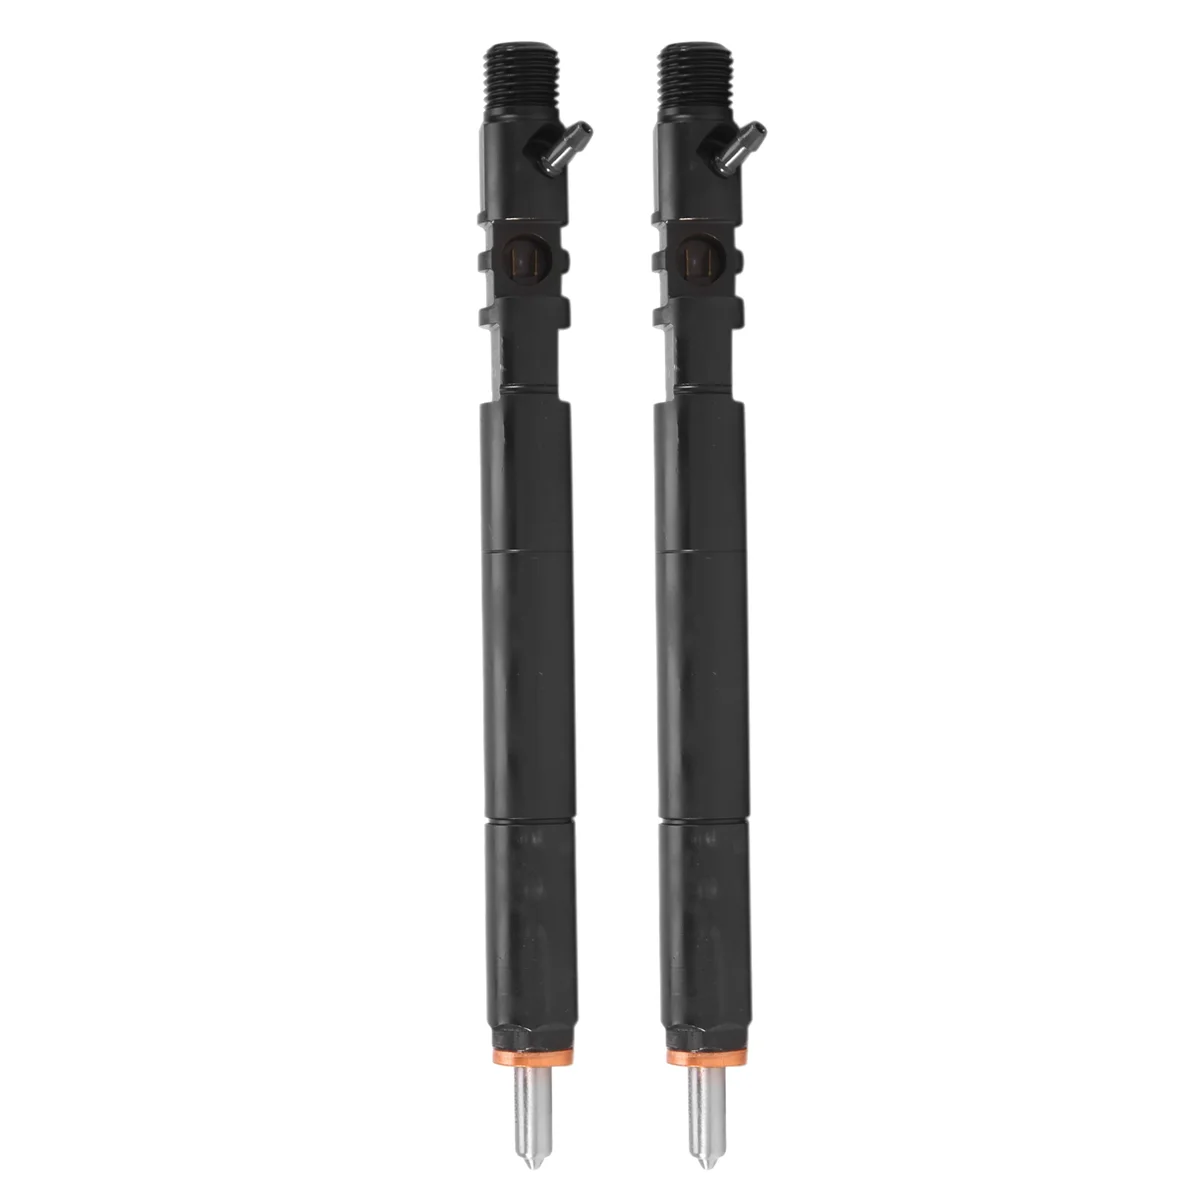 

2PCS Crude Oil Fuel Injector Nozzle A6650170321 EJBR02601Z for SsangYong Kyron Rexton Rodius Stavic 2.7Xdi Euro 3 163PS